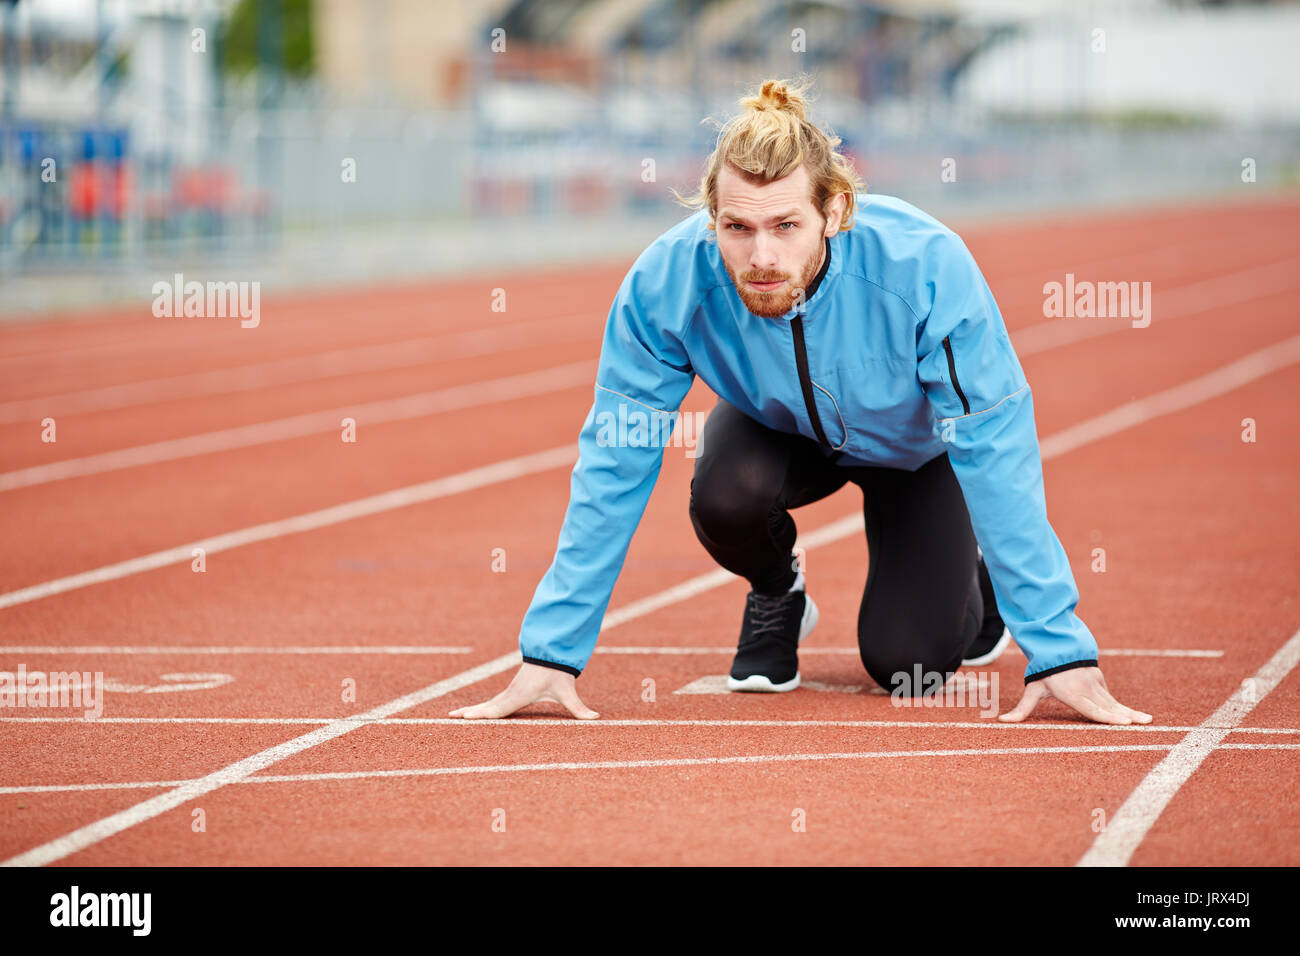 Determined young athlete on starting line at track and field stadium Stock Photo